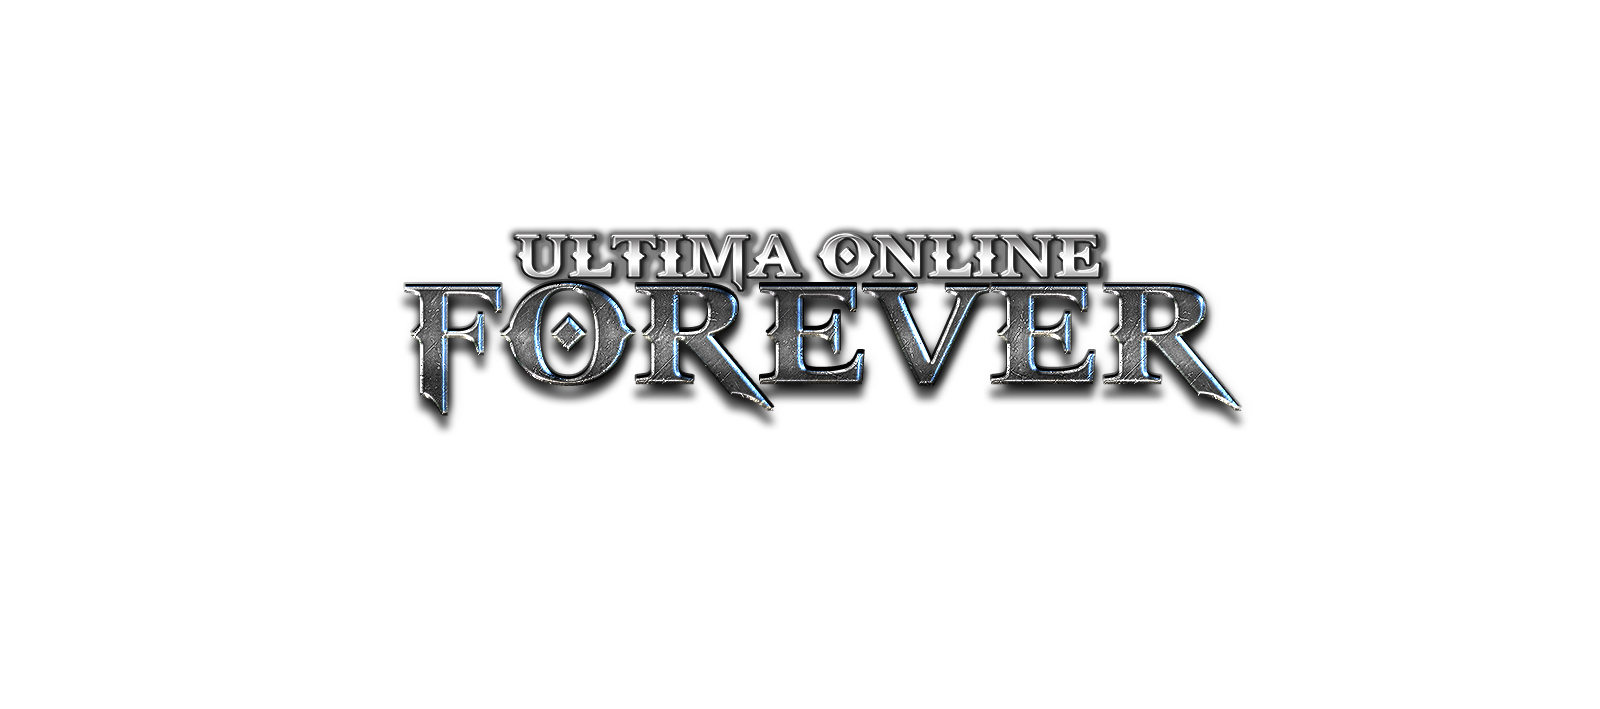 who owns ultima online forever